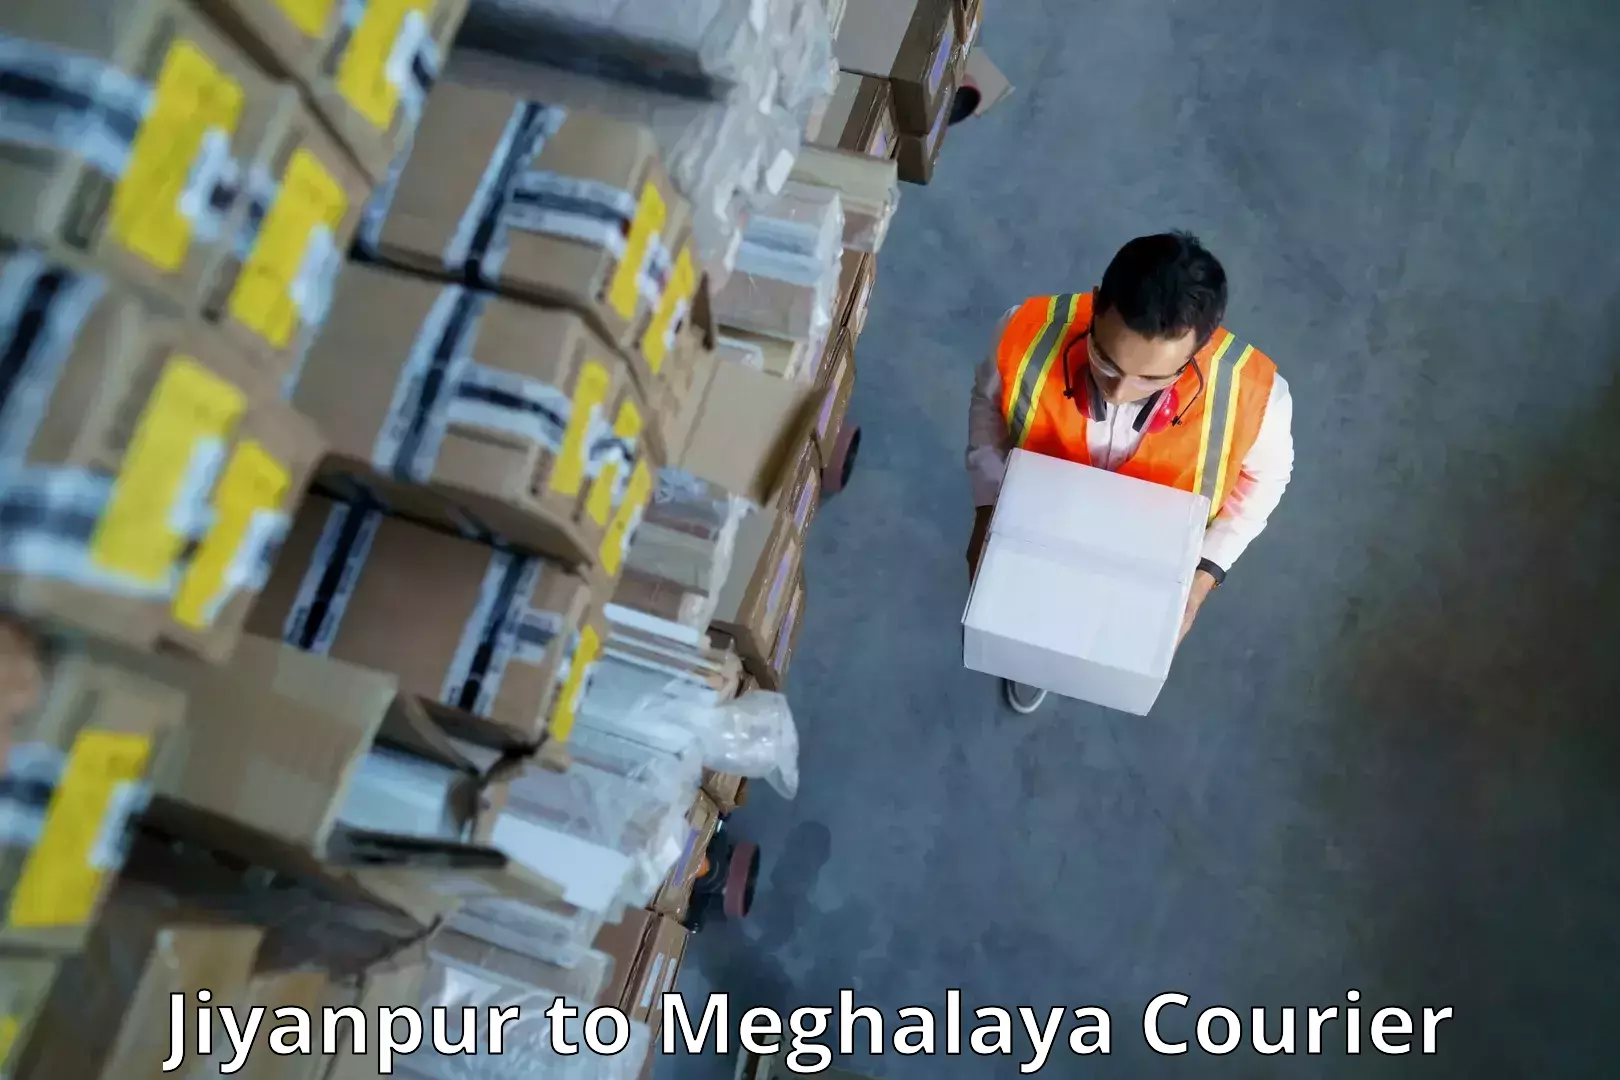 High-capacity parcel service Jiyanpur to Dkhiah West